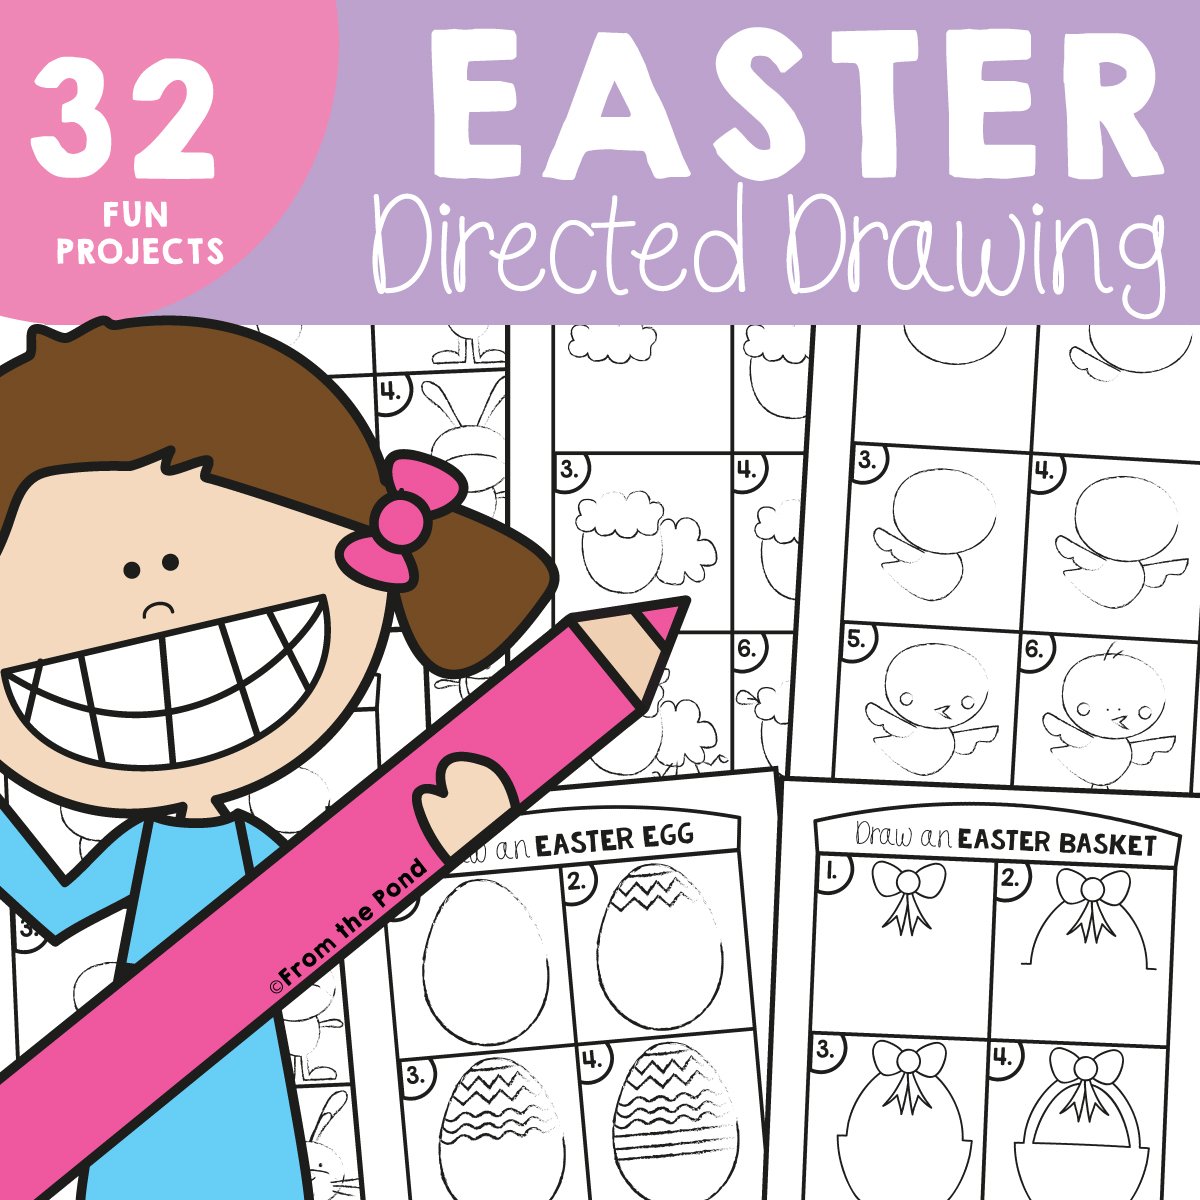 EASTER-DIRECTED-DRAWING-PIC.jpg